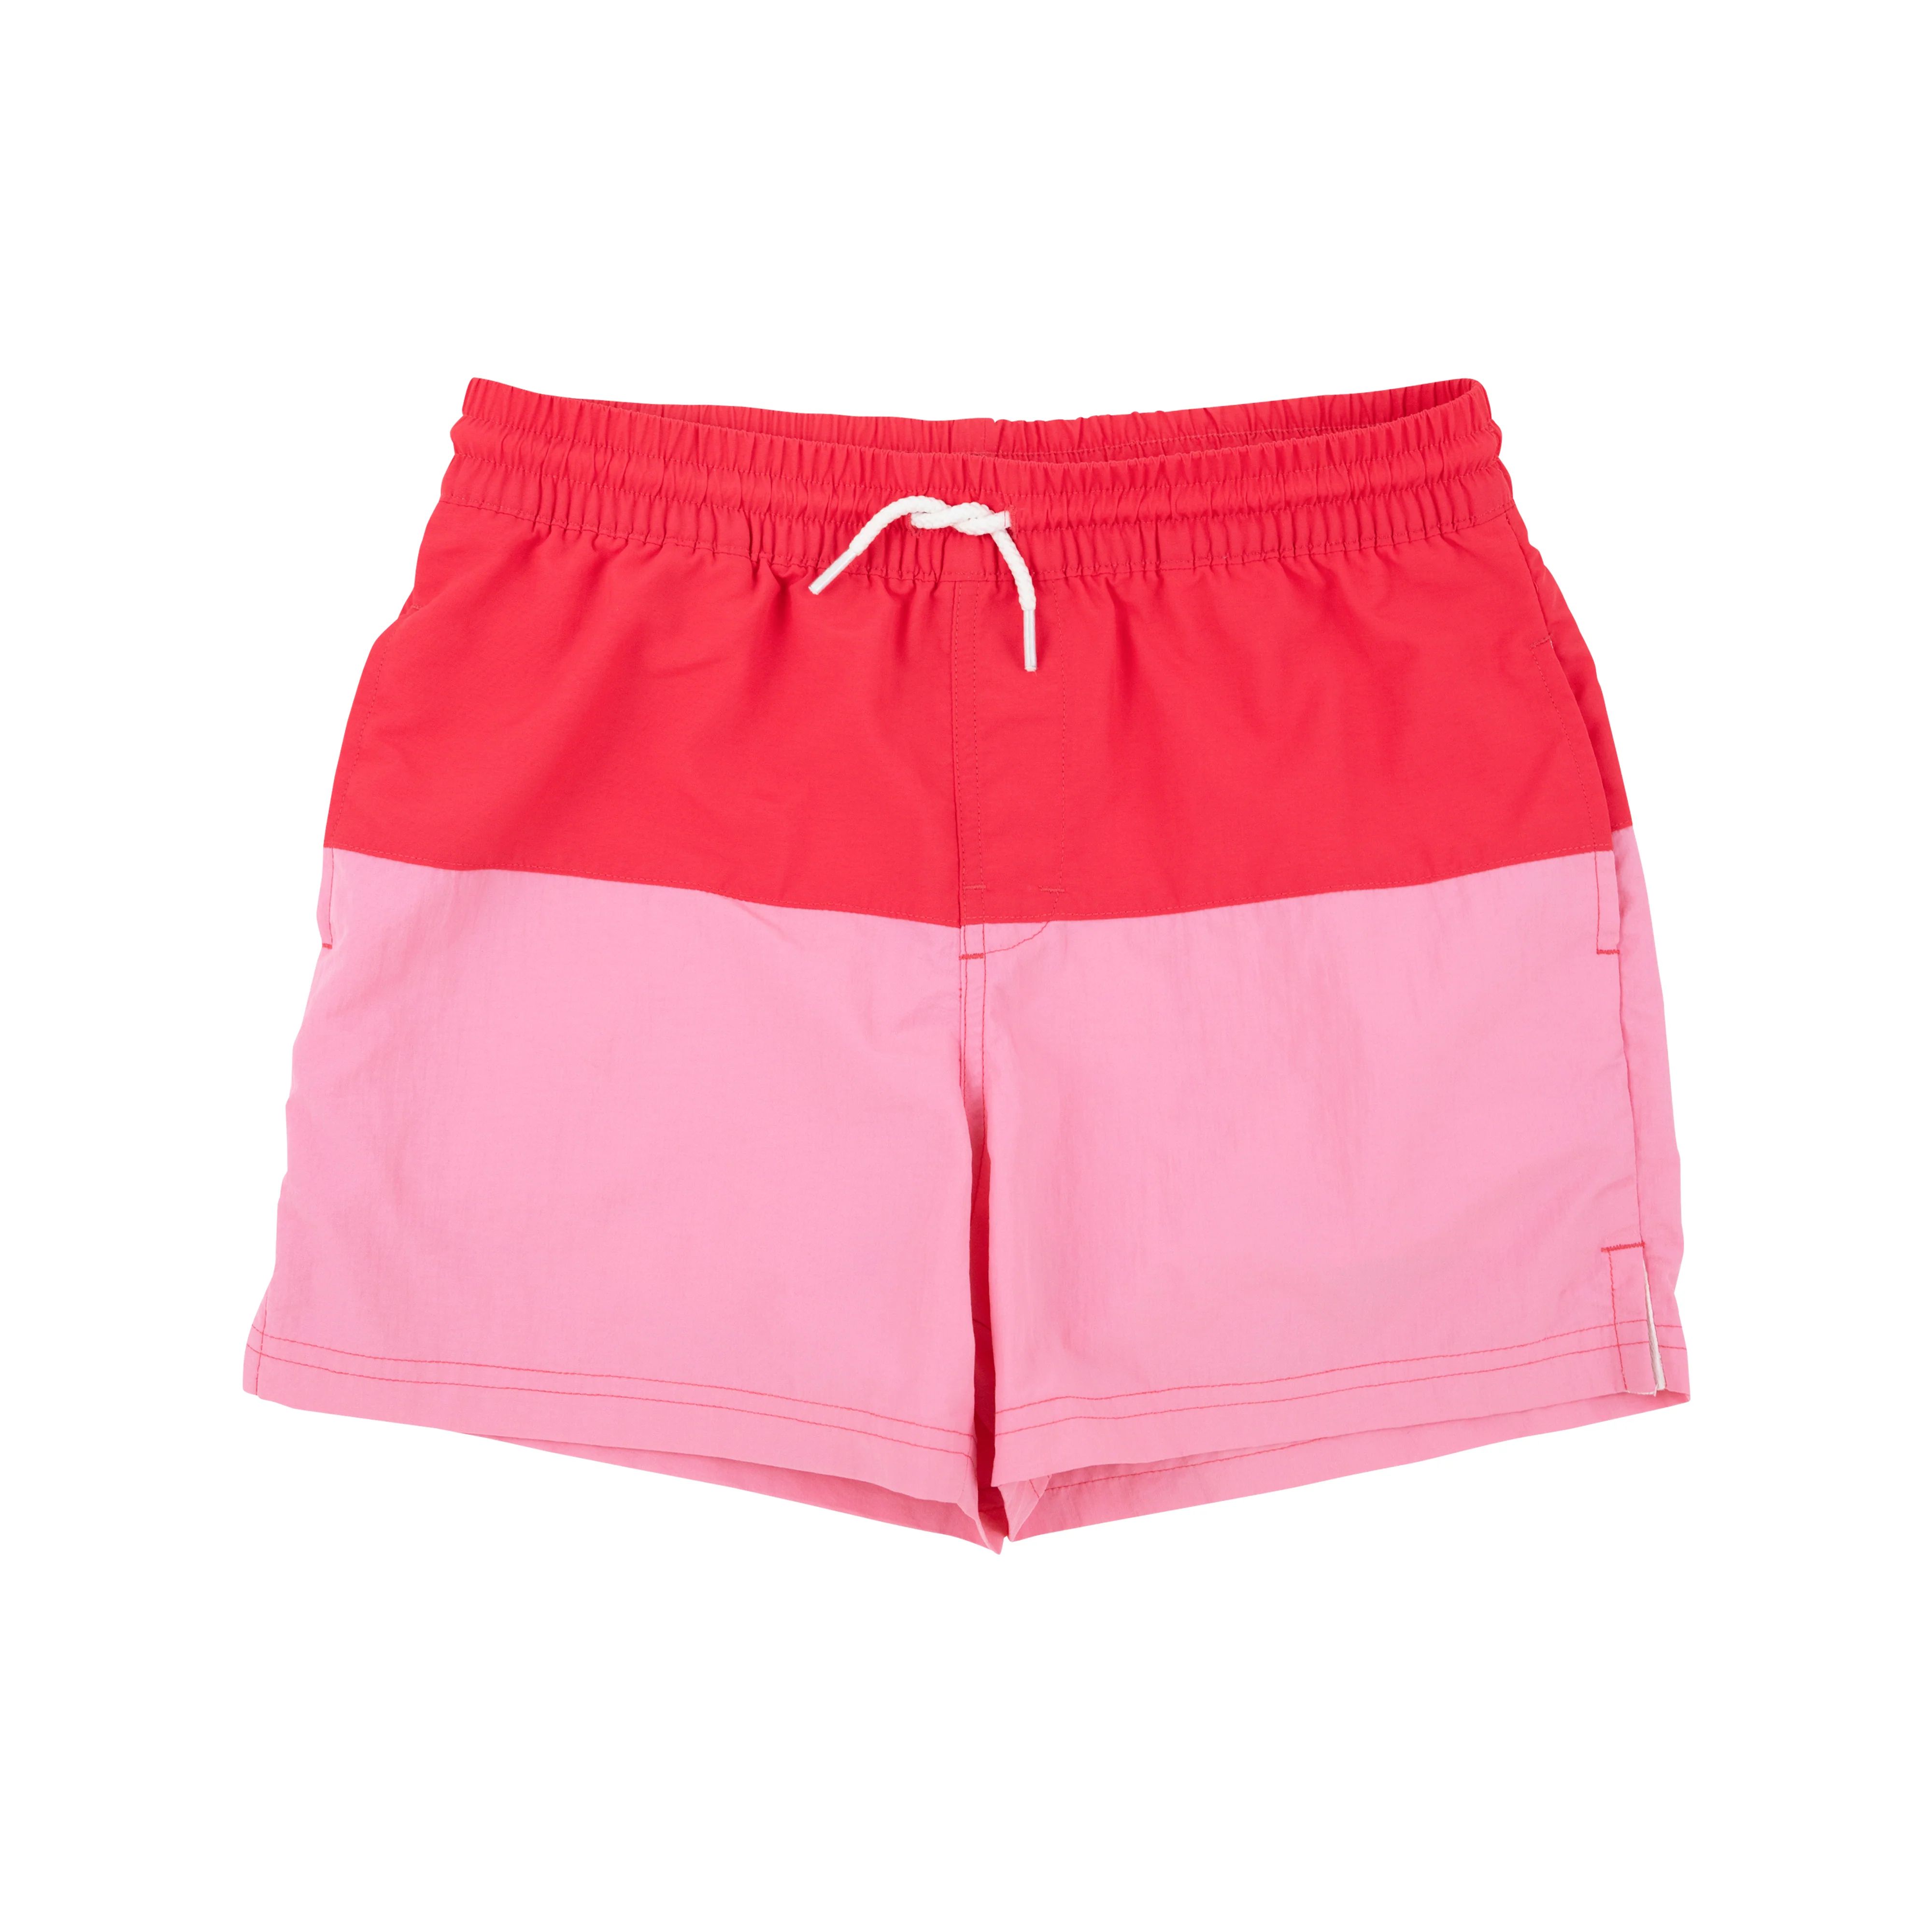 Country Club Colorblock Trunks - Richmond Red with Hamptons Hot Pink | The Beaufort Bonnet Company